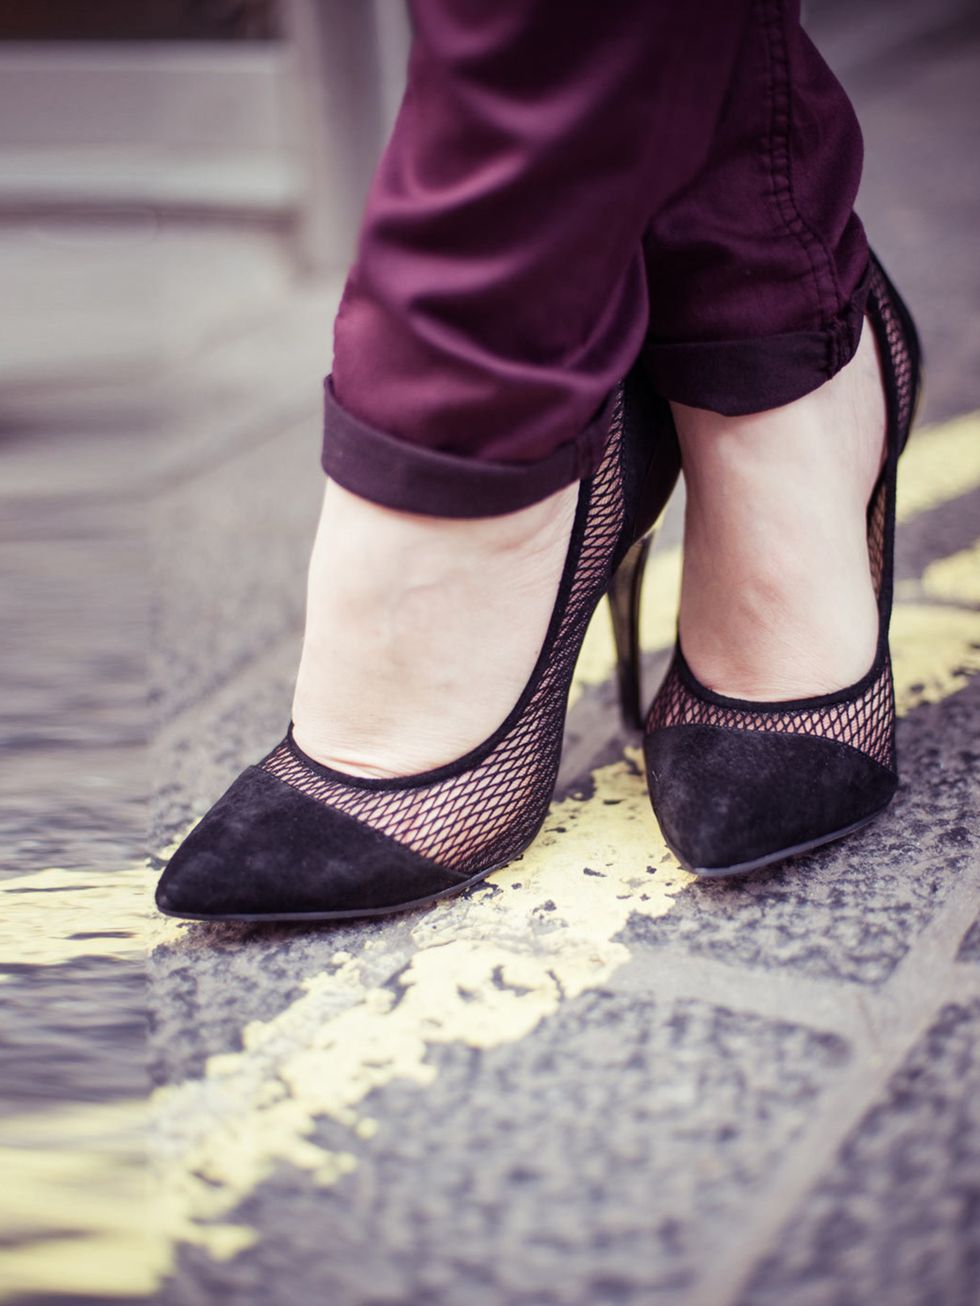 <p>Black pumps <a href="http://www.asos.com/ASOS/ASOS-PRESSED-Pointed-High-Heels-with-Suede-Detail/Prod/pgeproduct.aspx?iid=2525422&amp;cid=6461&amp;Rf-400=53&amp;sh=0&amp;pge=0&amp;pgesize=200&amp;sort=-1&amp;clr=Black">ASOS</a> £55, Burgundy maternity j